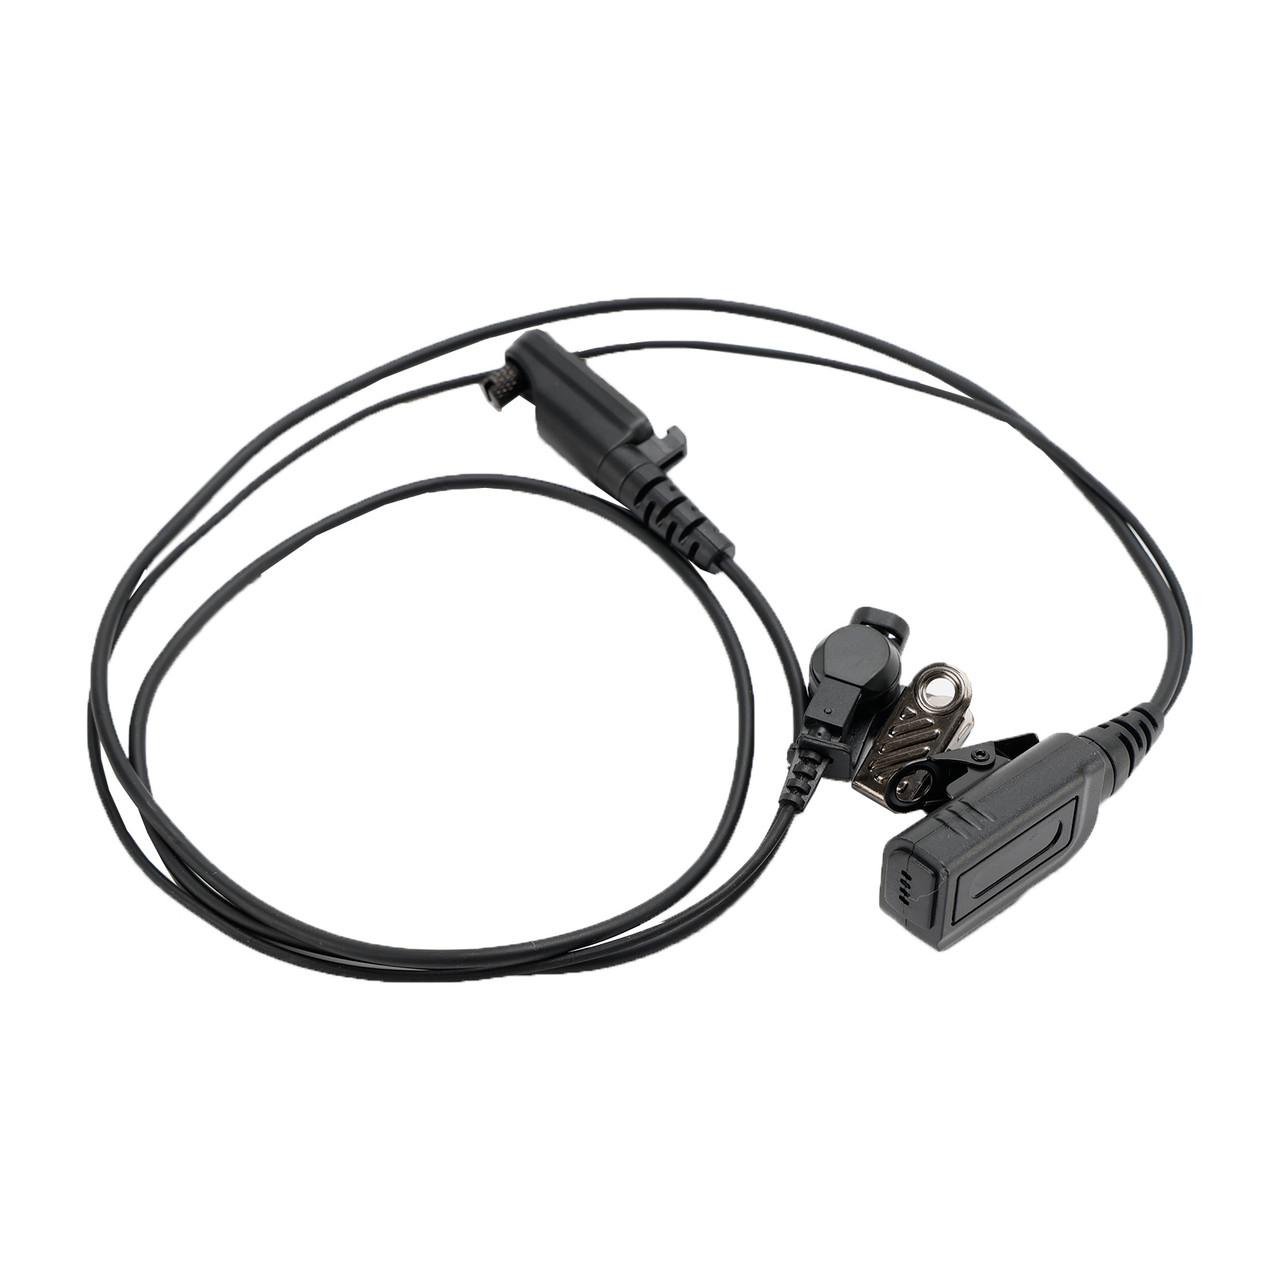 X1E-020A3 Acoustic Tube PTT Mic Headset Fit for Hytera X1P X1E X1 PD600 PD680